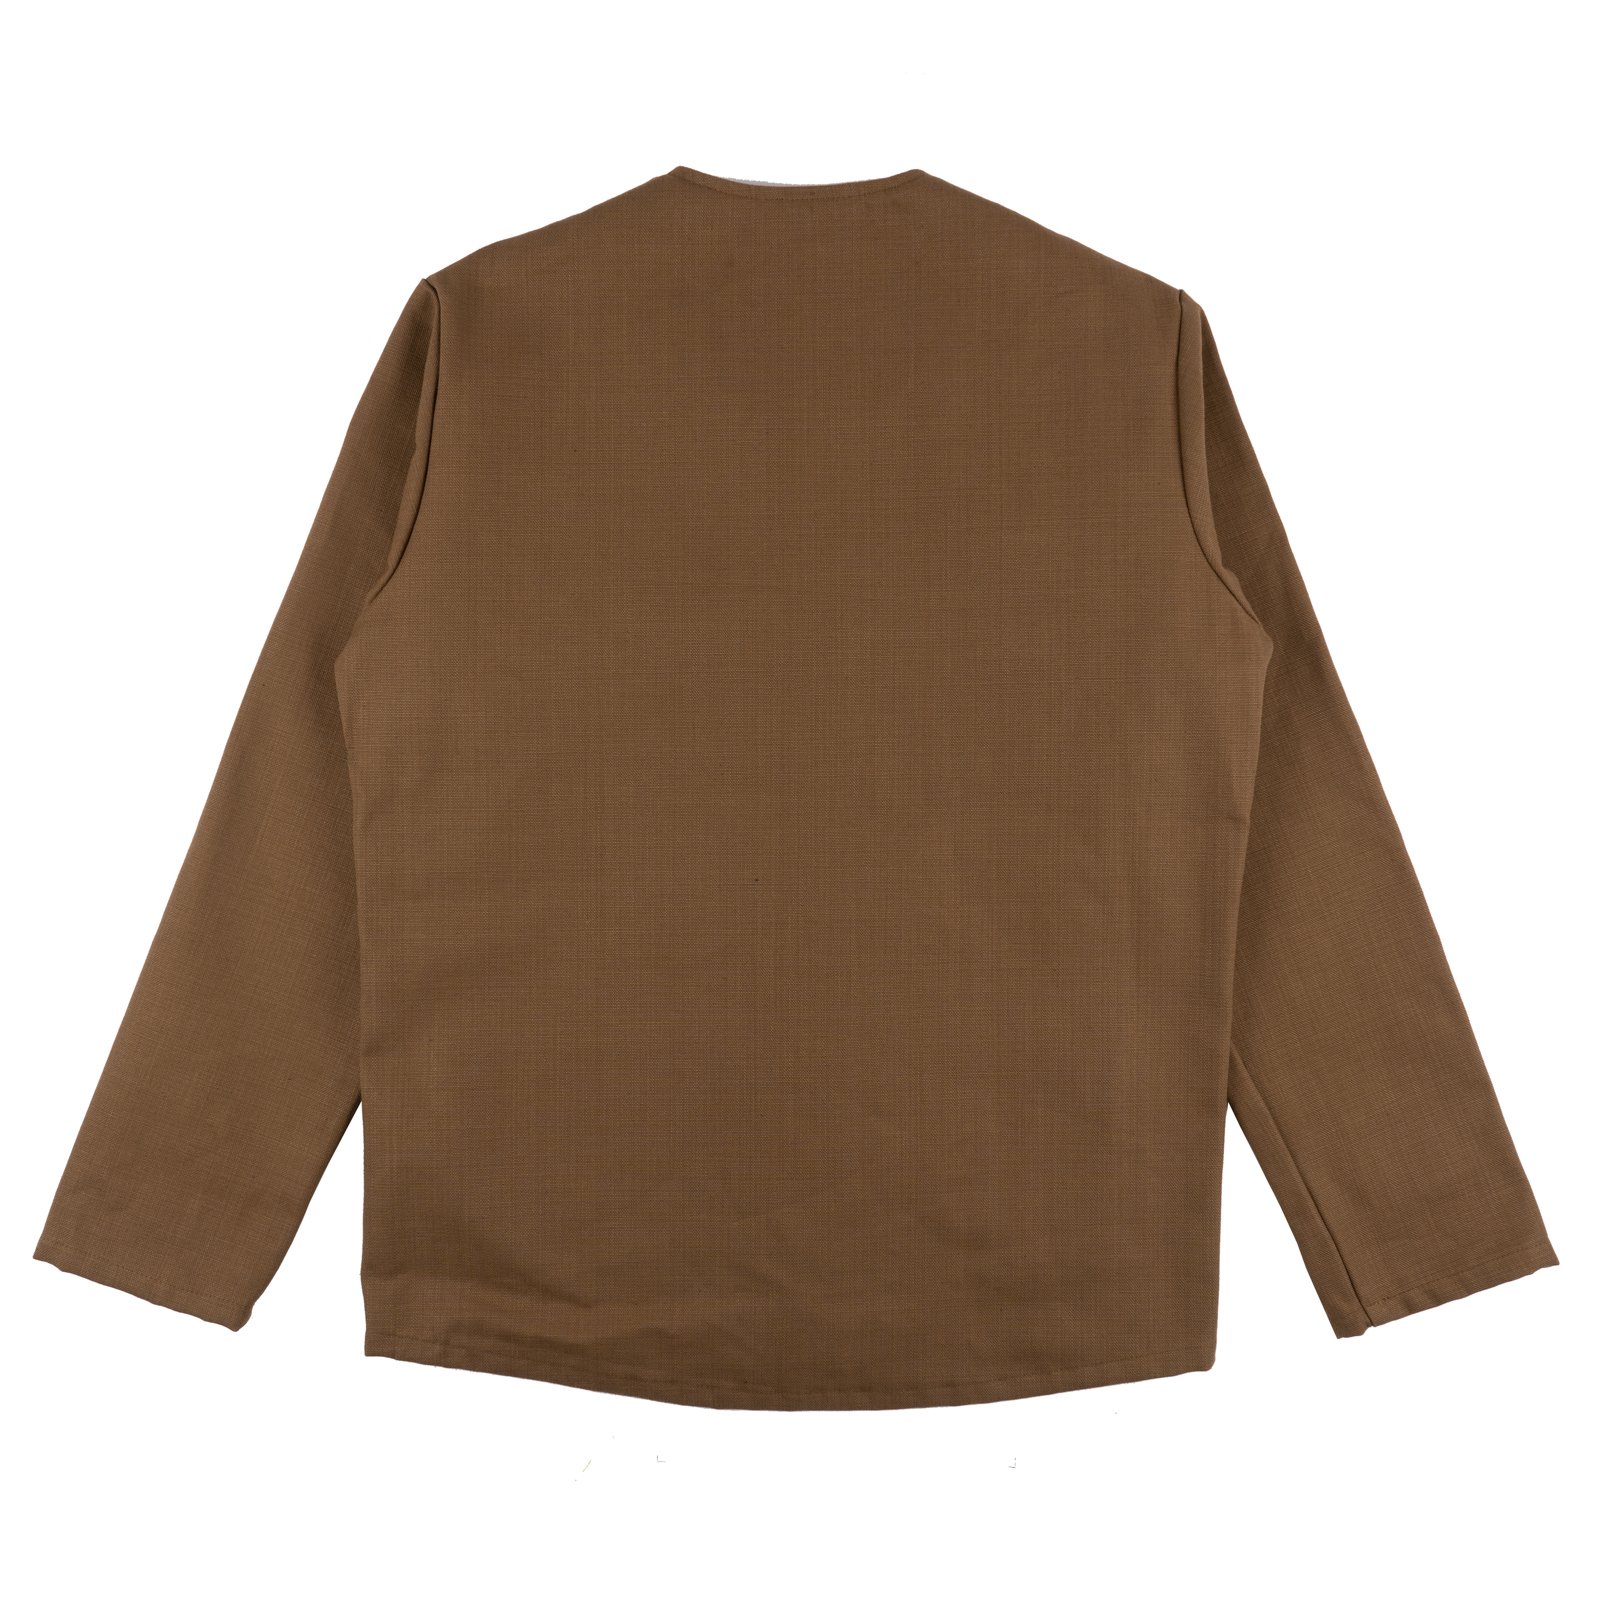  Raw Cotton Canvas Brown - Smart Jacket - back 